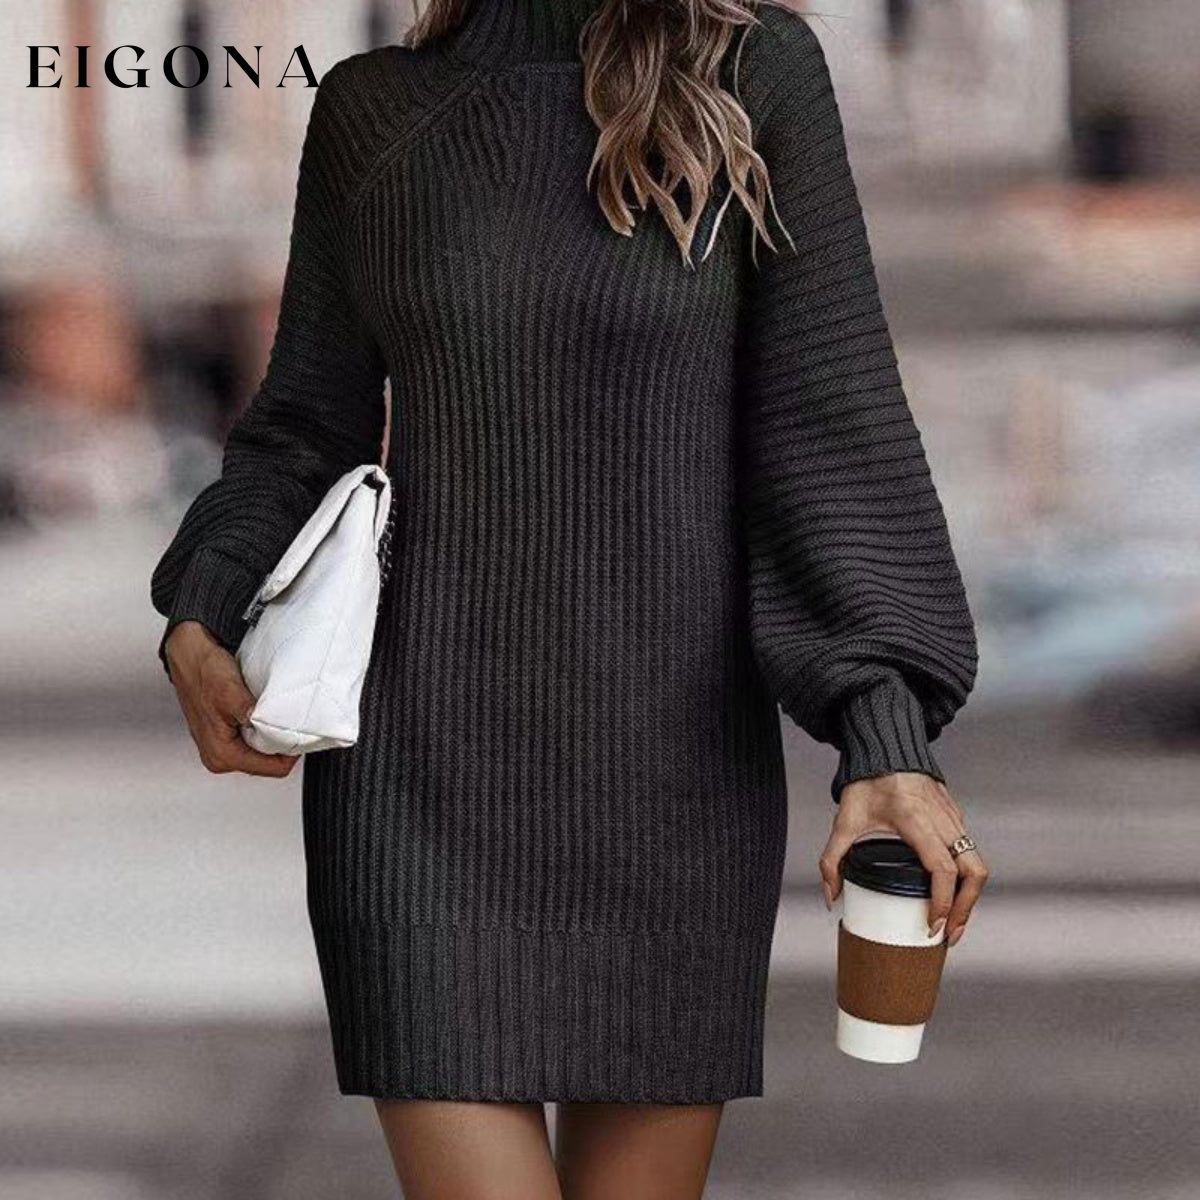 Mock Neck Lantern Sleeve Sweater Dress Black casual dresses clothes dress dresses Ship From Overseas Shipping Delay 09/29/2023 - 10/04/2023 sweater dress Y@Y@D@Y